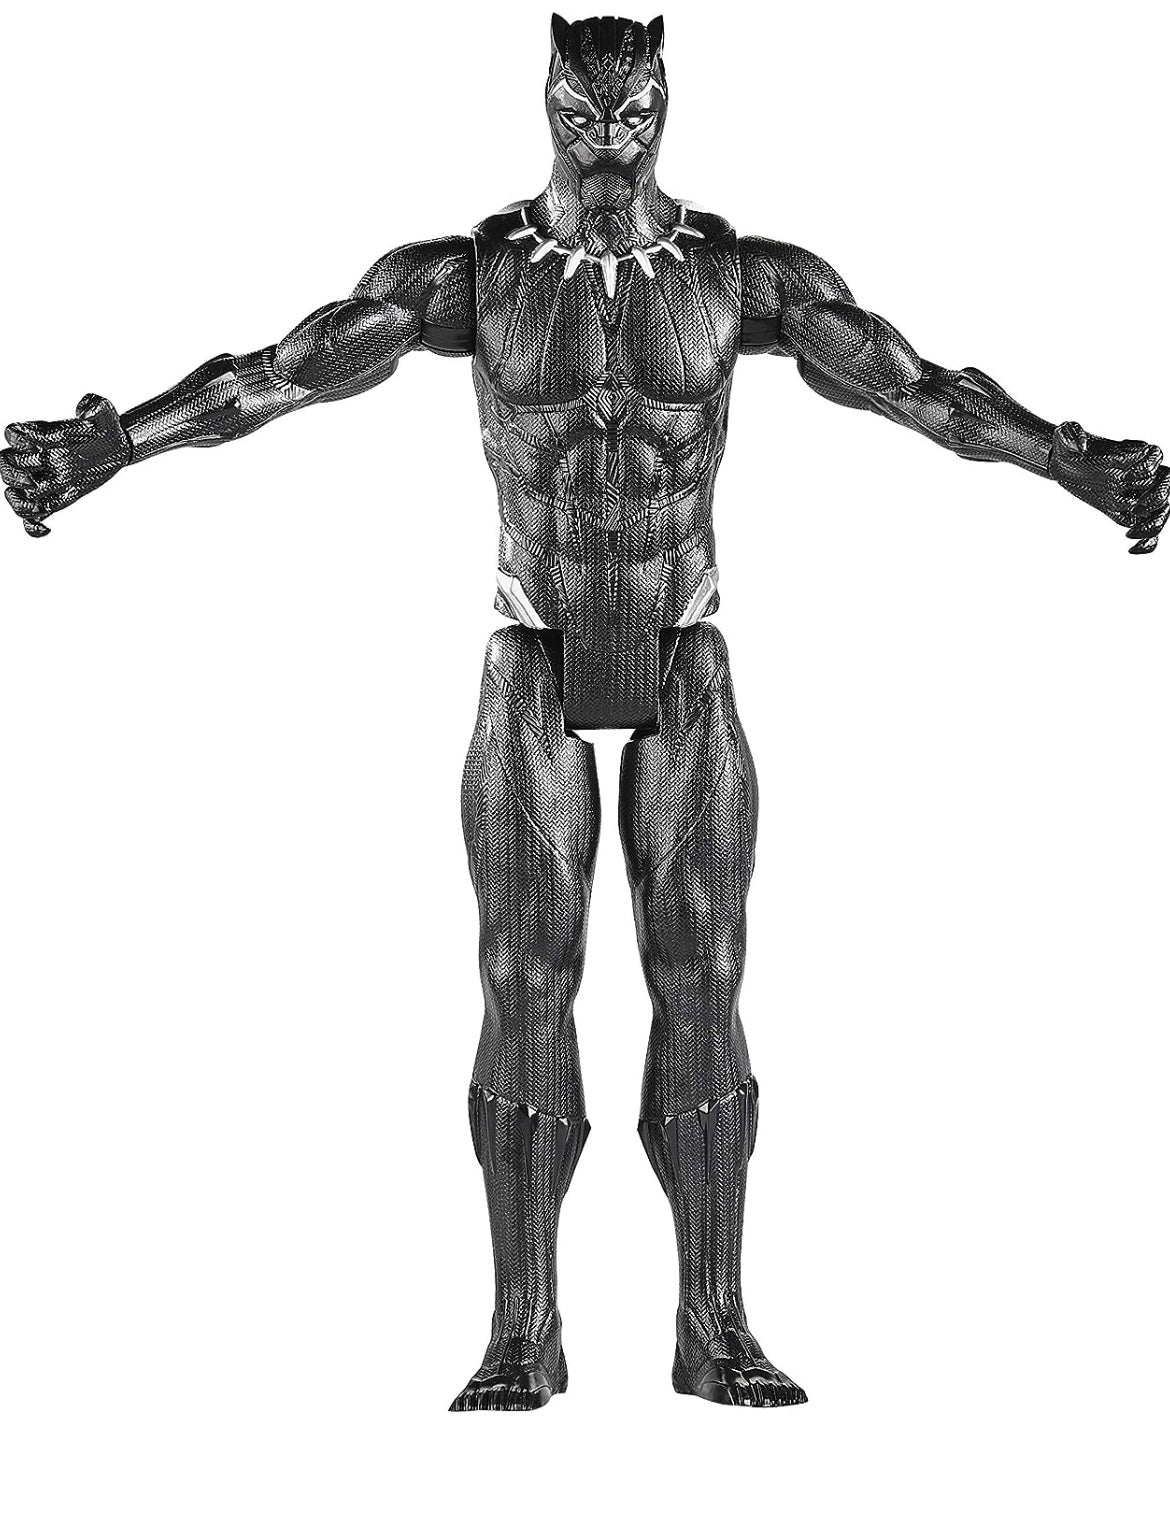 Black Panther action figure